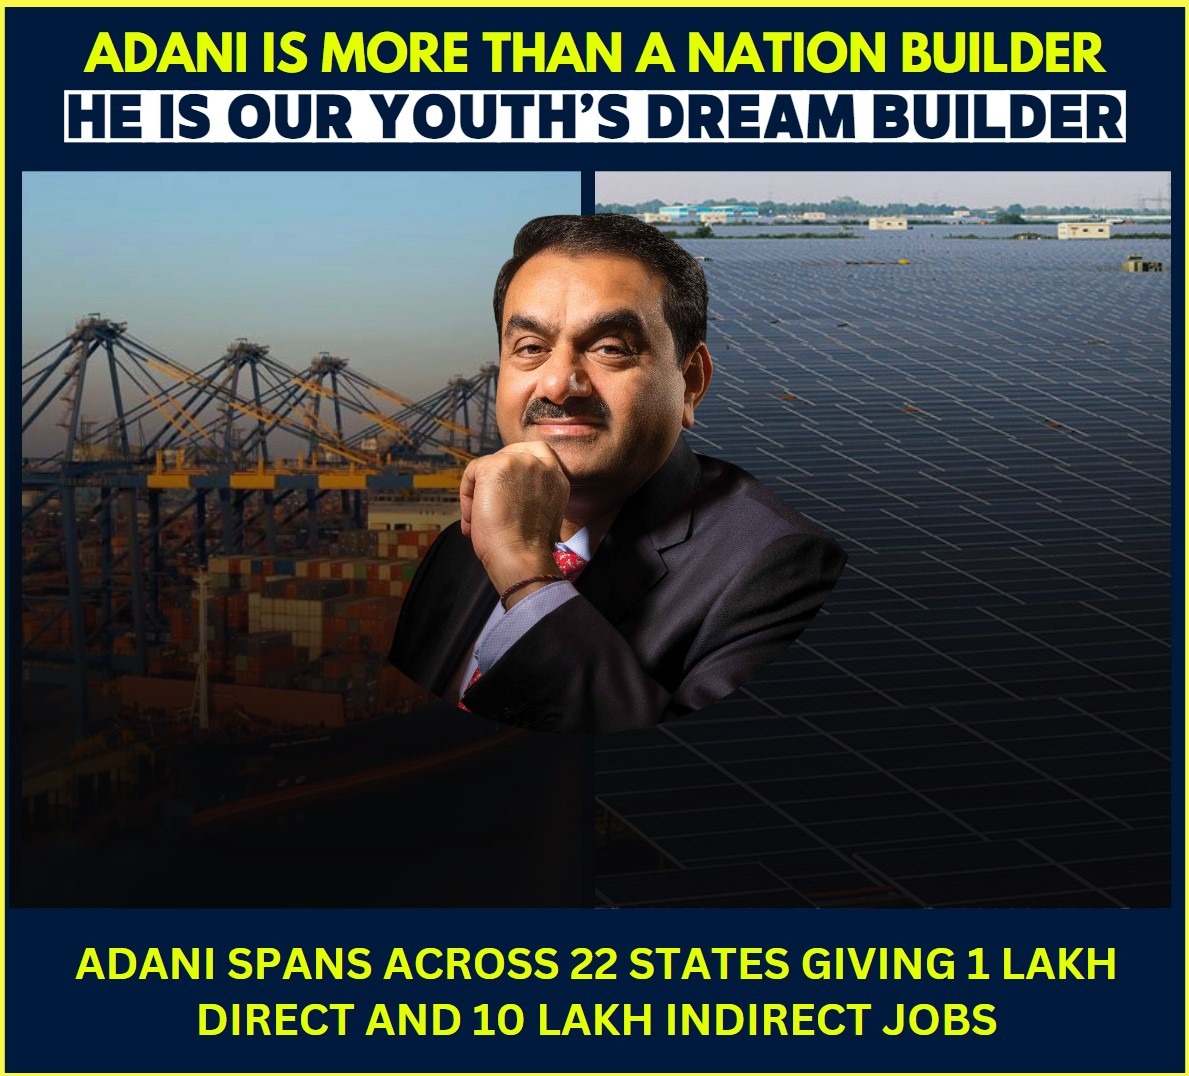 #Adani’s identity as a nation builder is enriched by his role as a dream builder for the youth. His operations across 22 states are a powerhouse of employment. The provision of 1 lakh direct and 10 lakh indirect jobs is a milestone in empowerment.